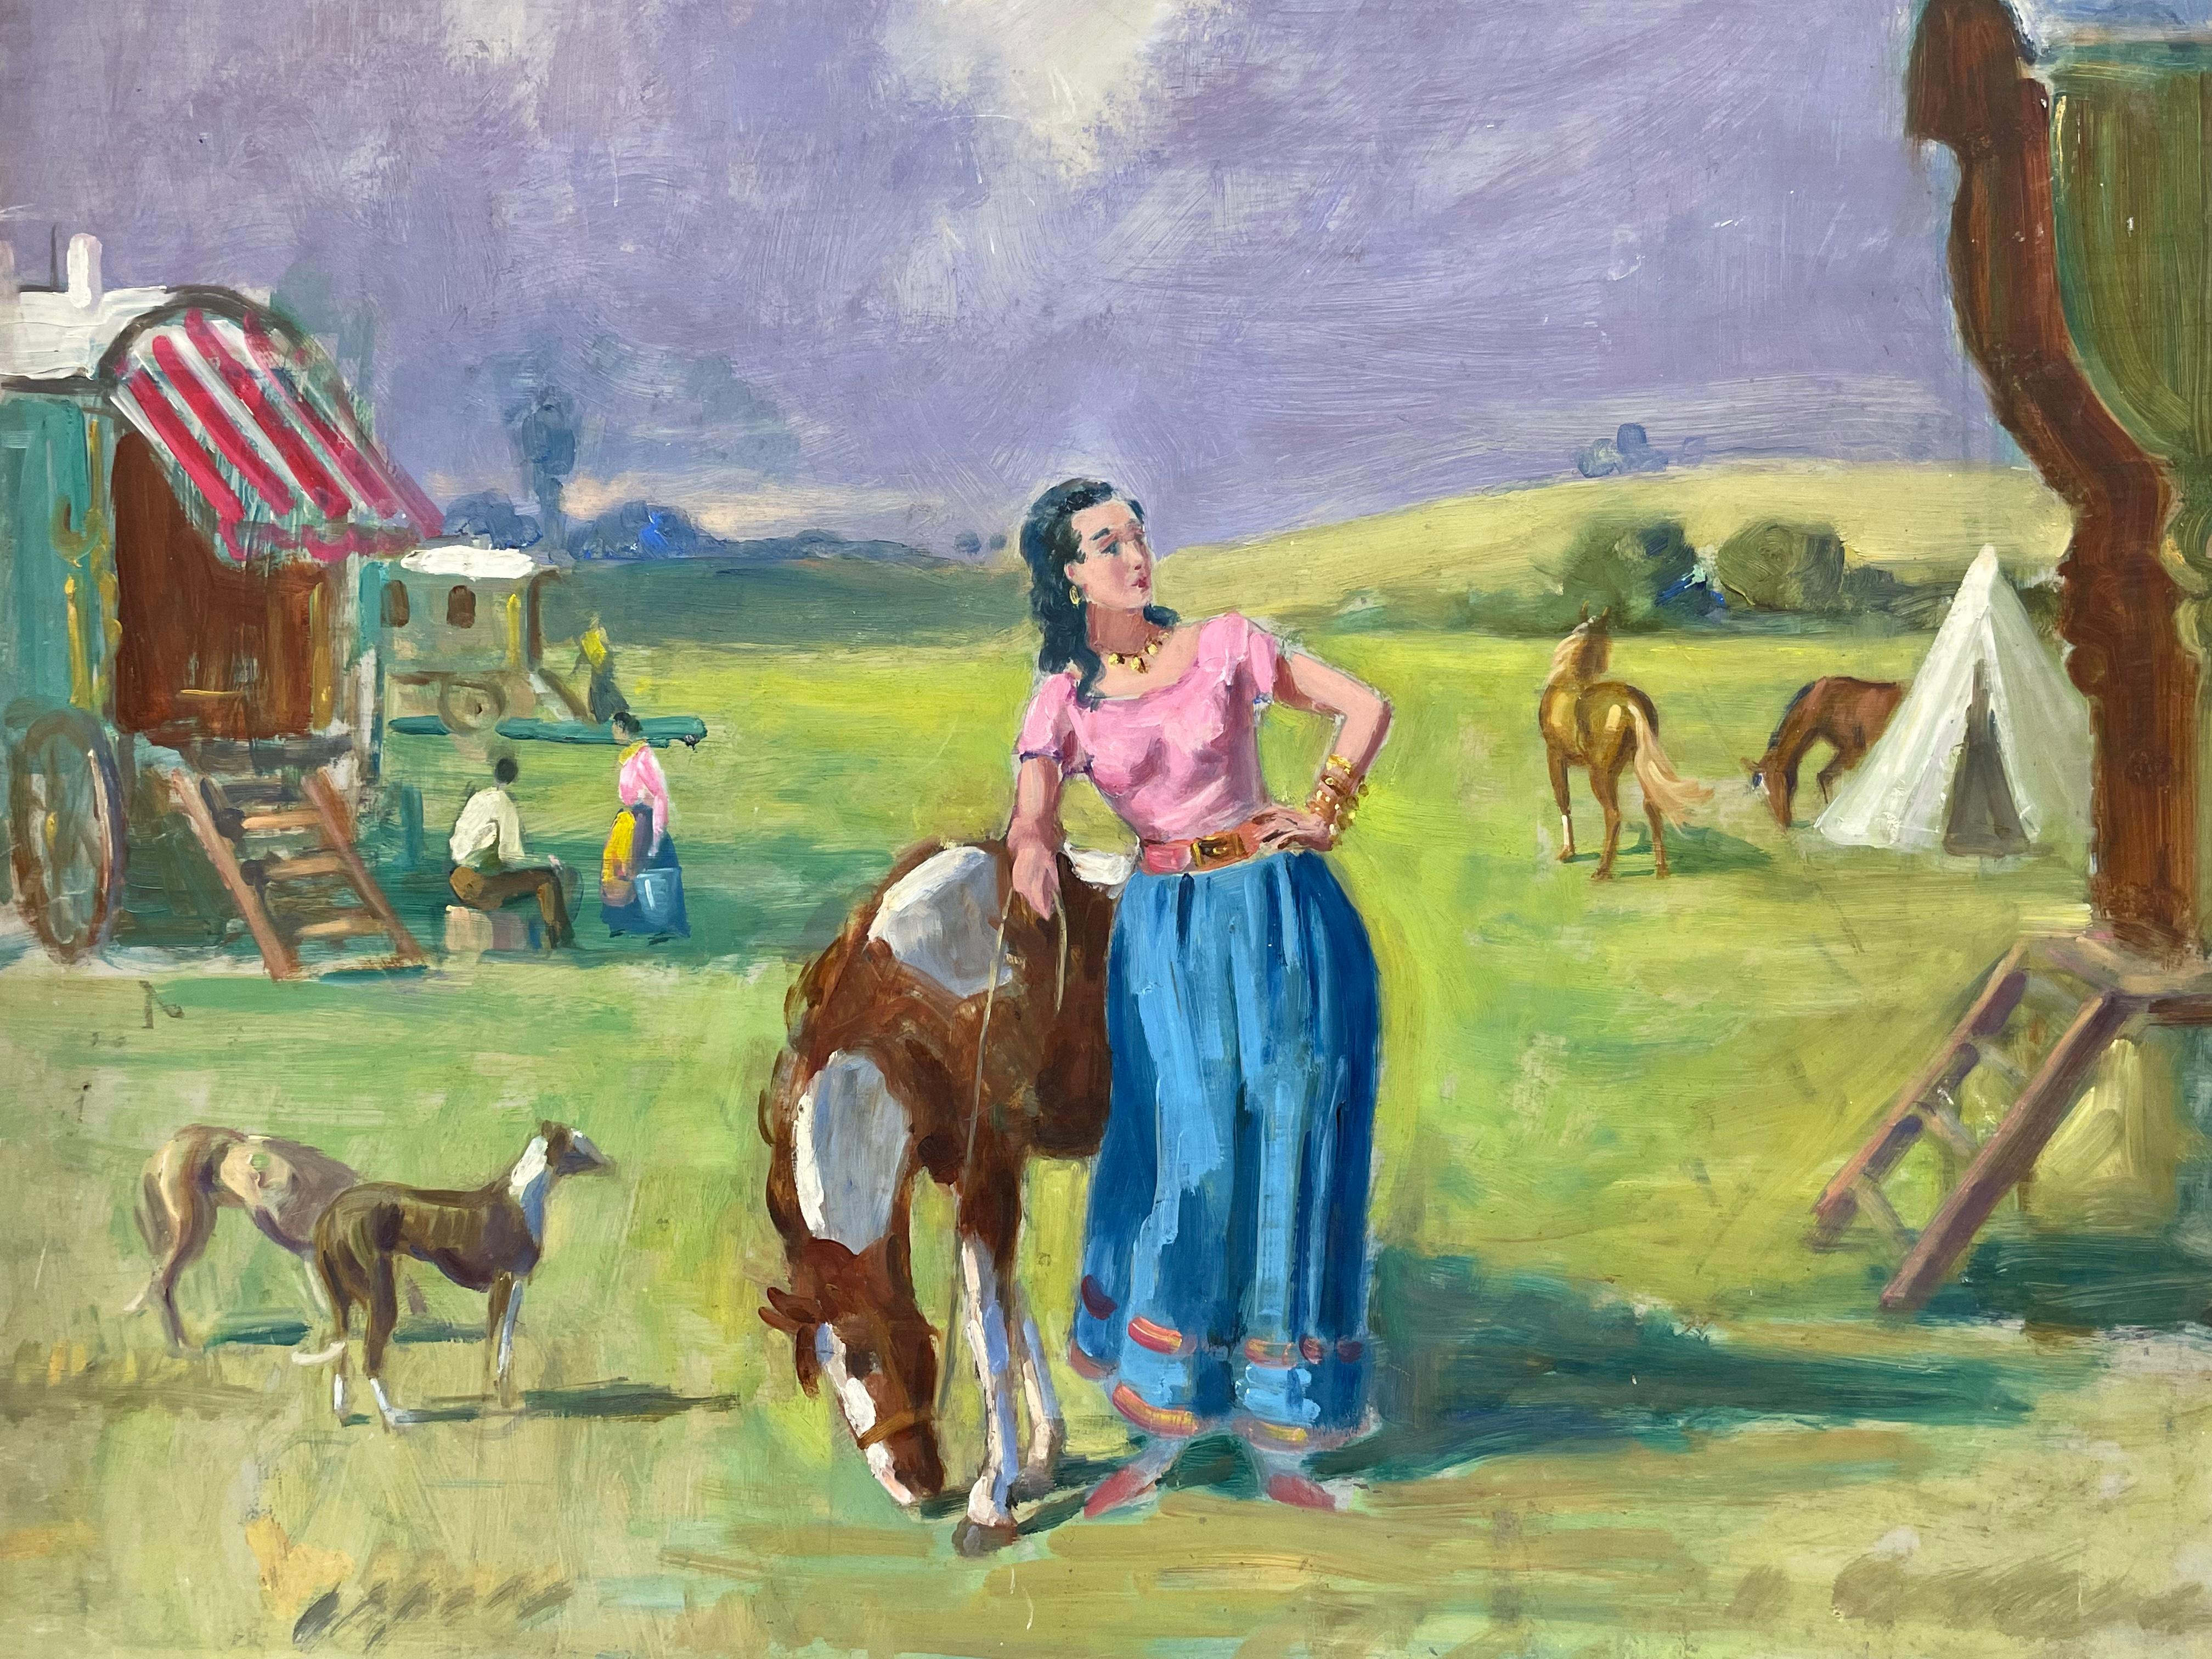 English Mid Century Landscape Painting - 1950's English Oil Travelers outside Gypsy Caravans with Horses in Landscape